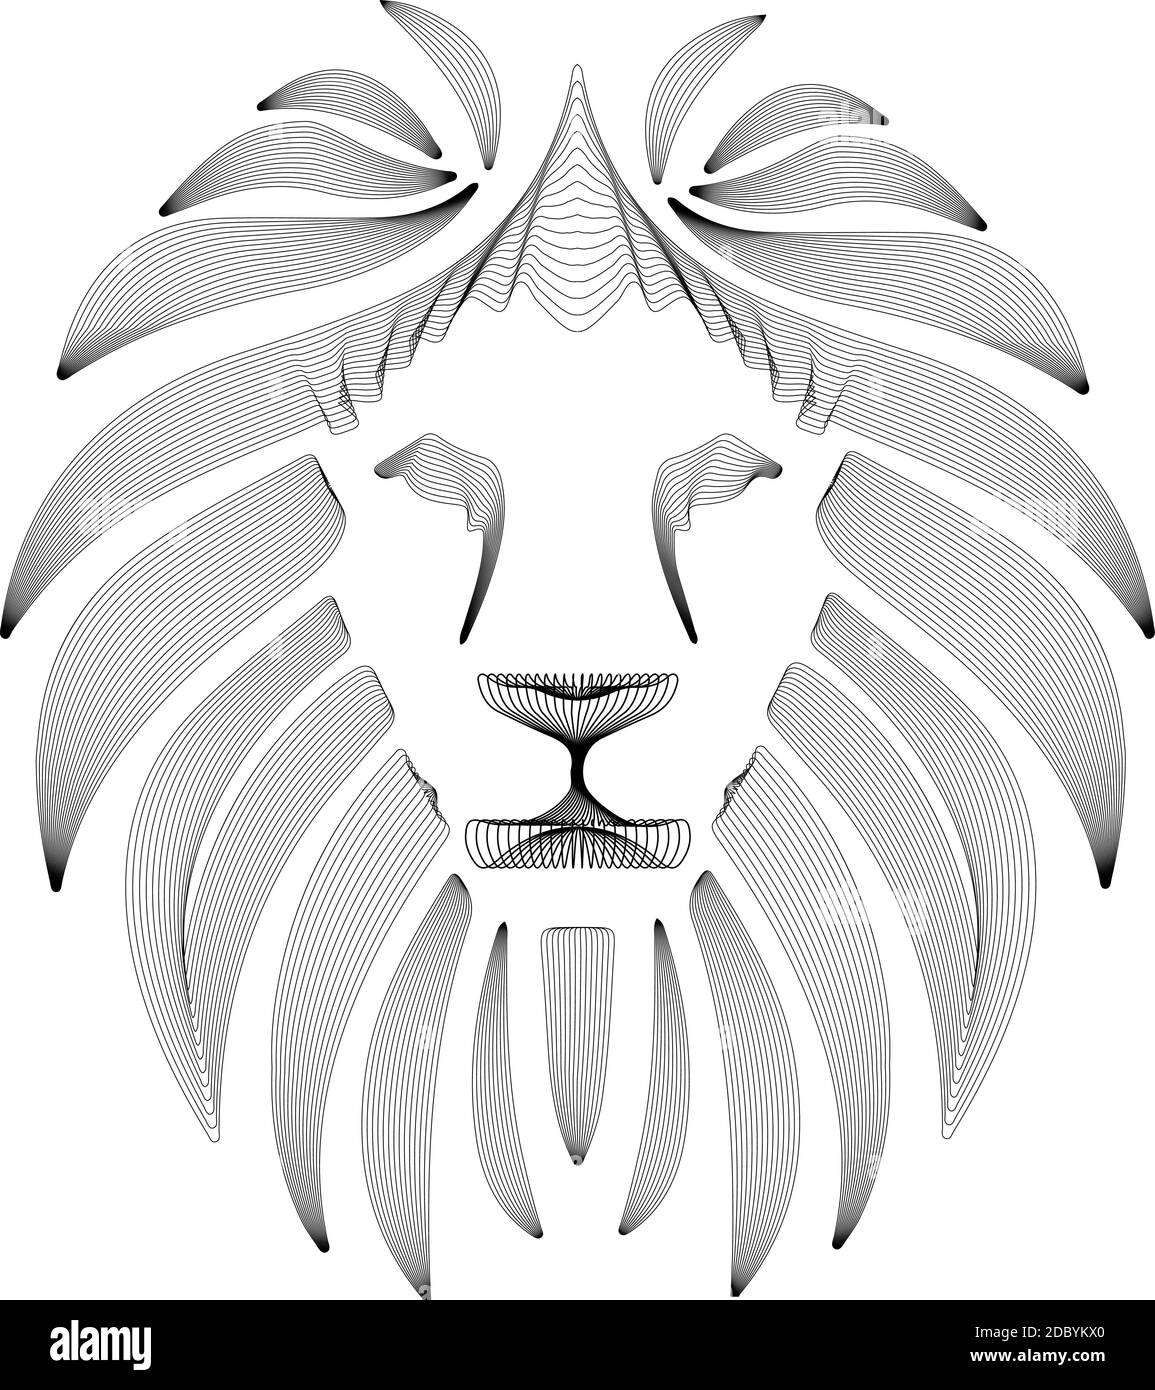 Linear stylized lion. Black and white graphic. Vector illustration can be used as design for tattoo, t-shirt, bag, poster, postcard Stock Vector